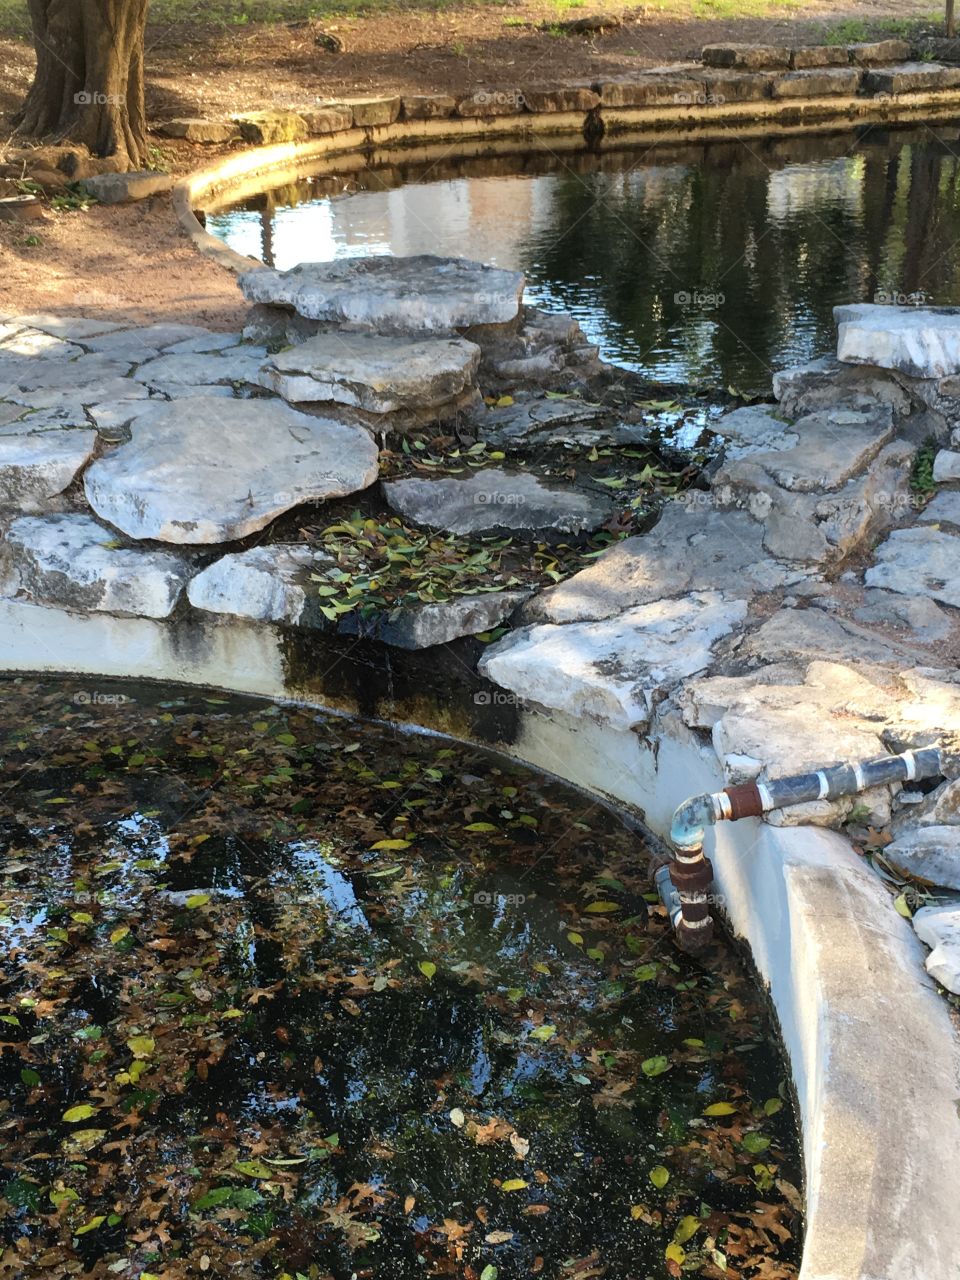 Turtle Pond at The University of Texas